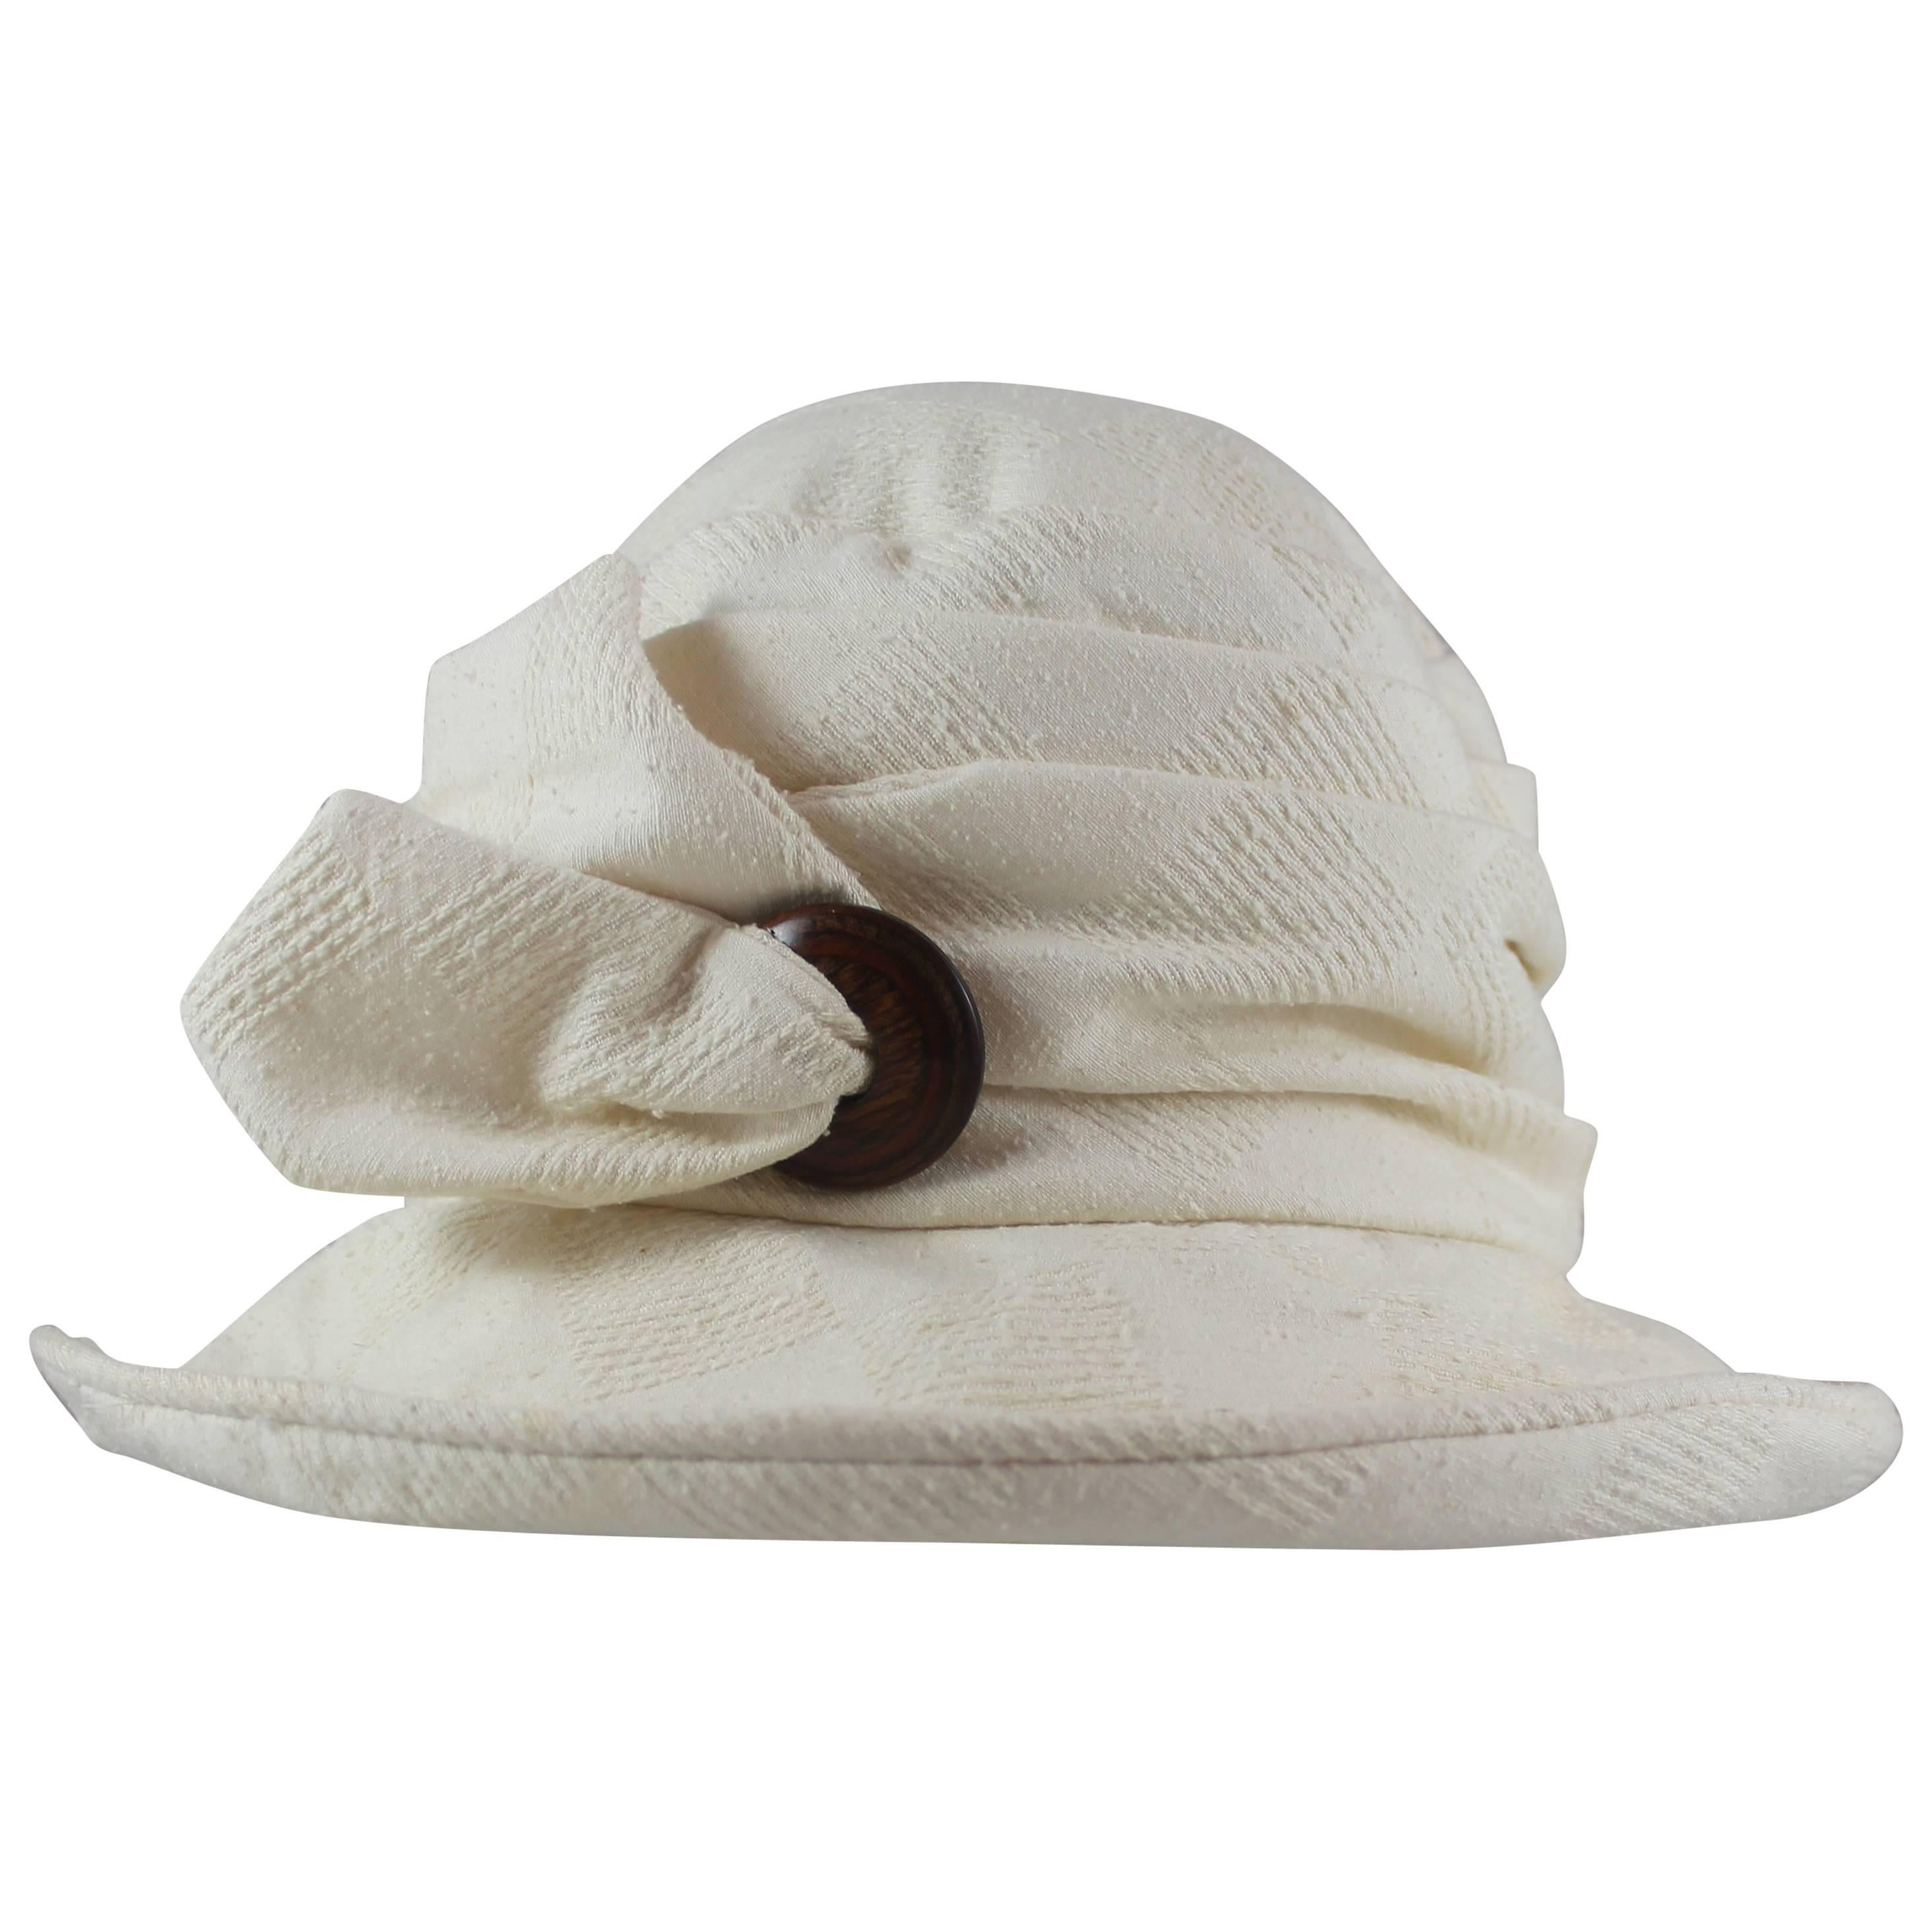 Suzanne Couture Millinery Ivory Cloth Floppy Hat with a Wooden Button